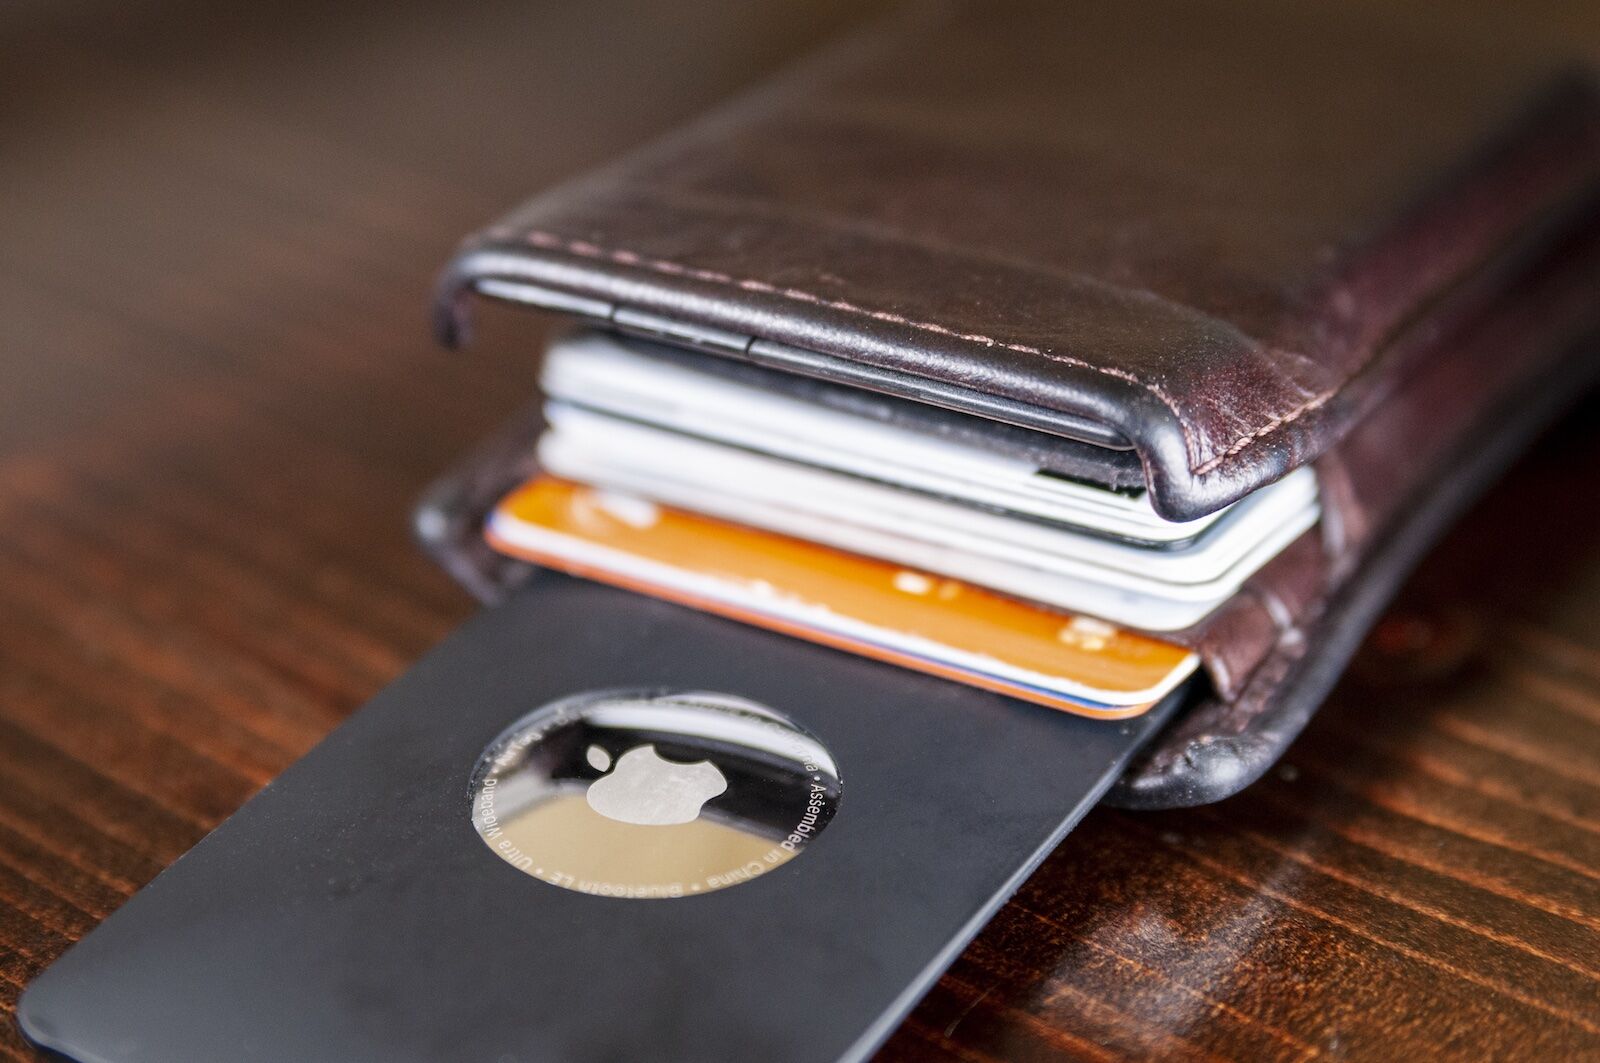 AirTag credit card case inside a wallet. AirTags should be an essential part of any frequent traveler's kit